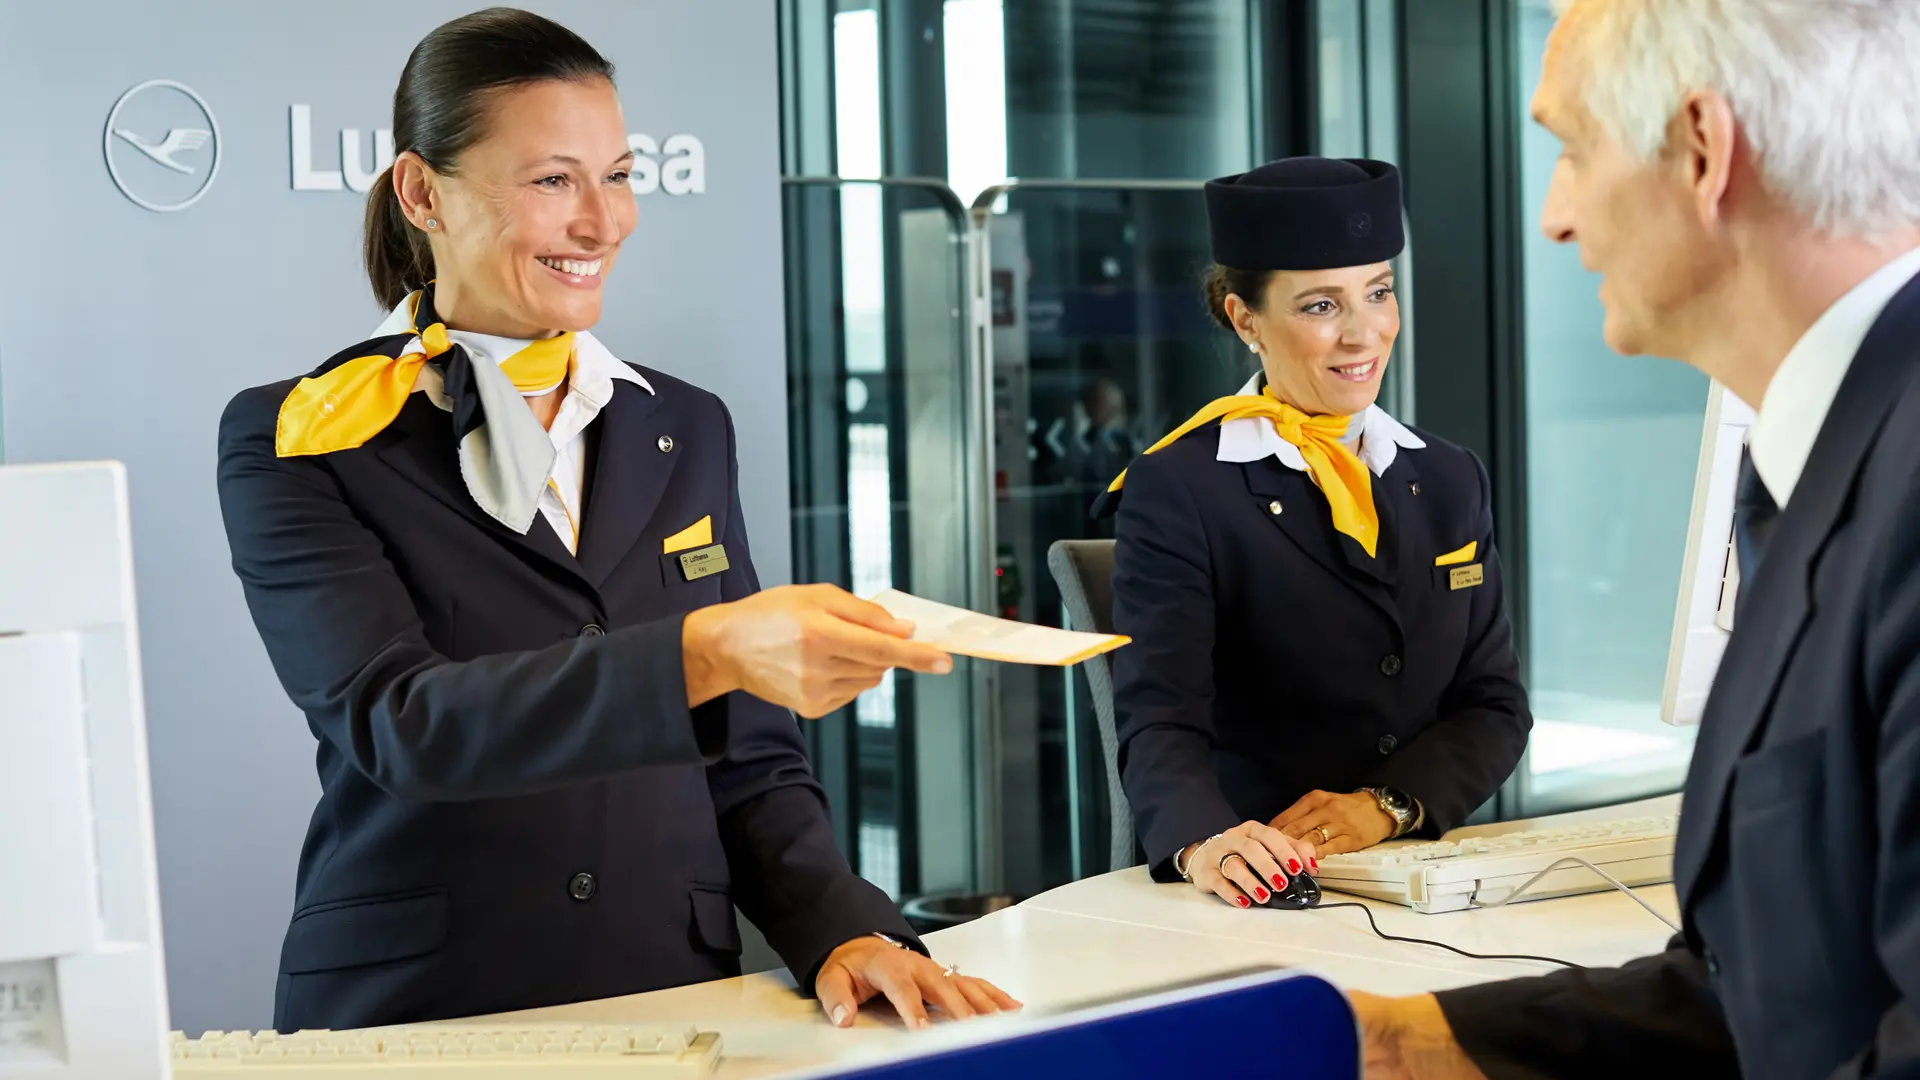 Airline review Airport experience - Lufthansa - 9